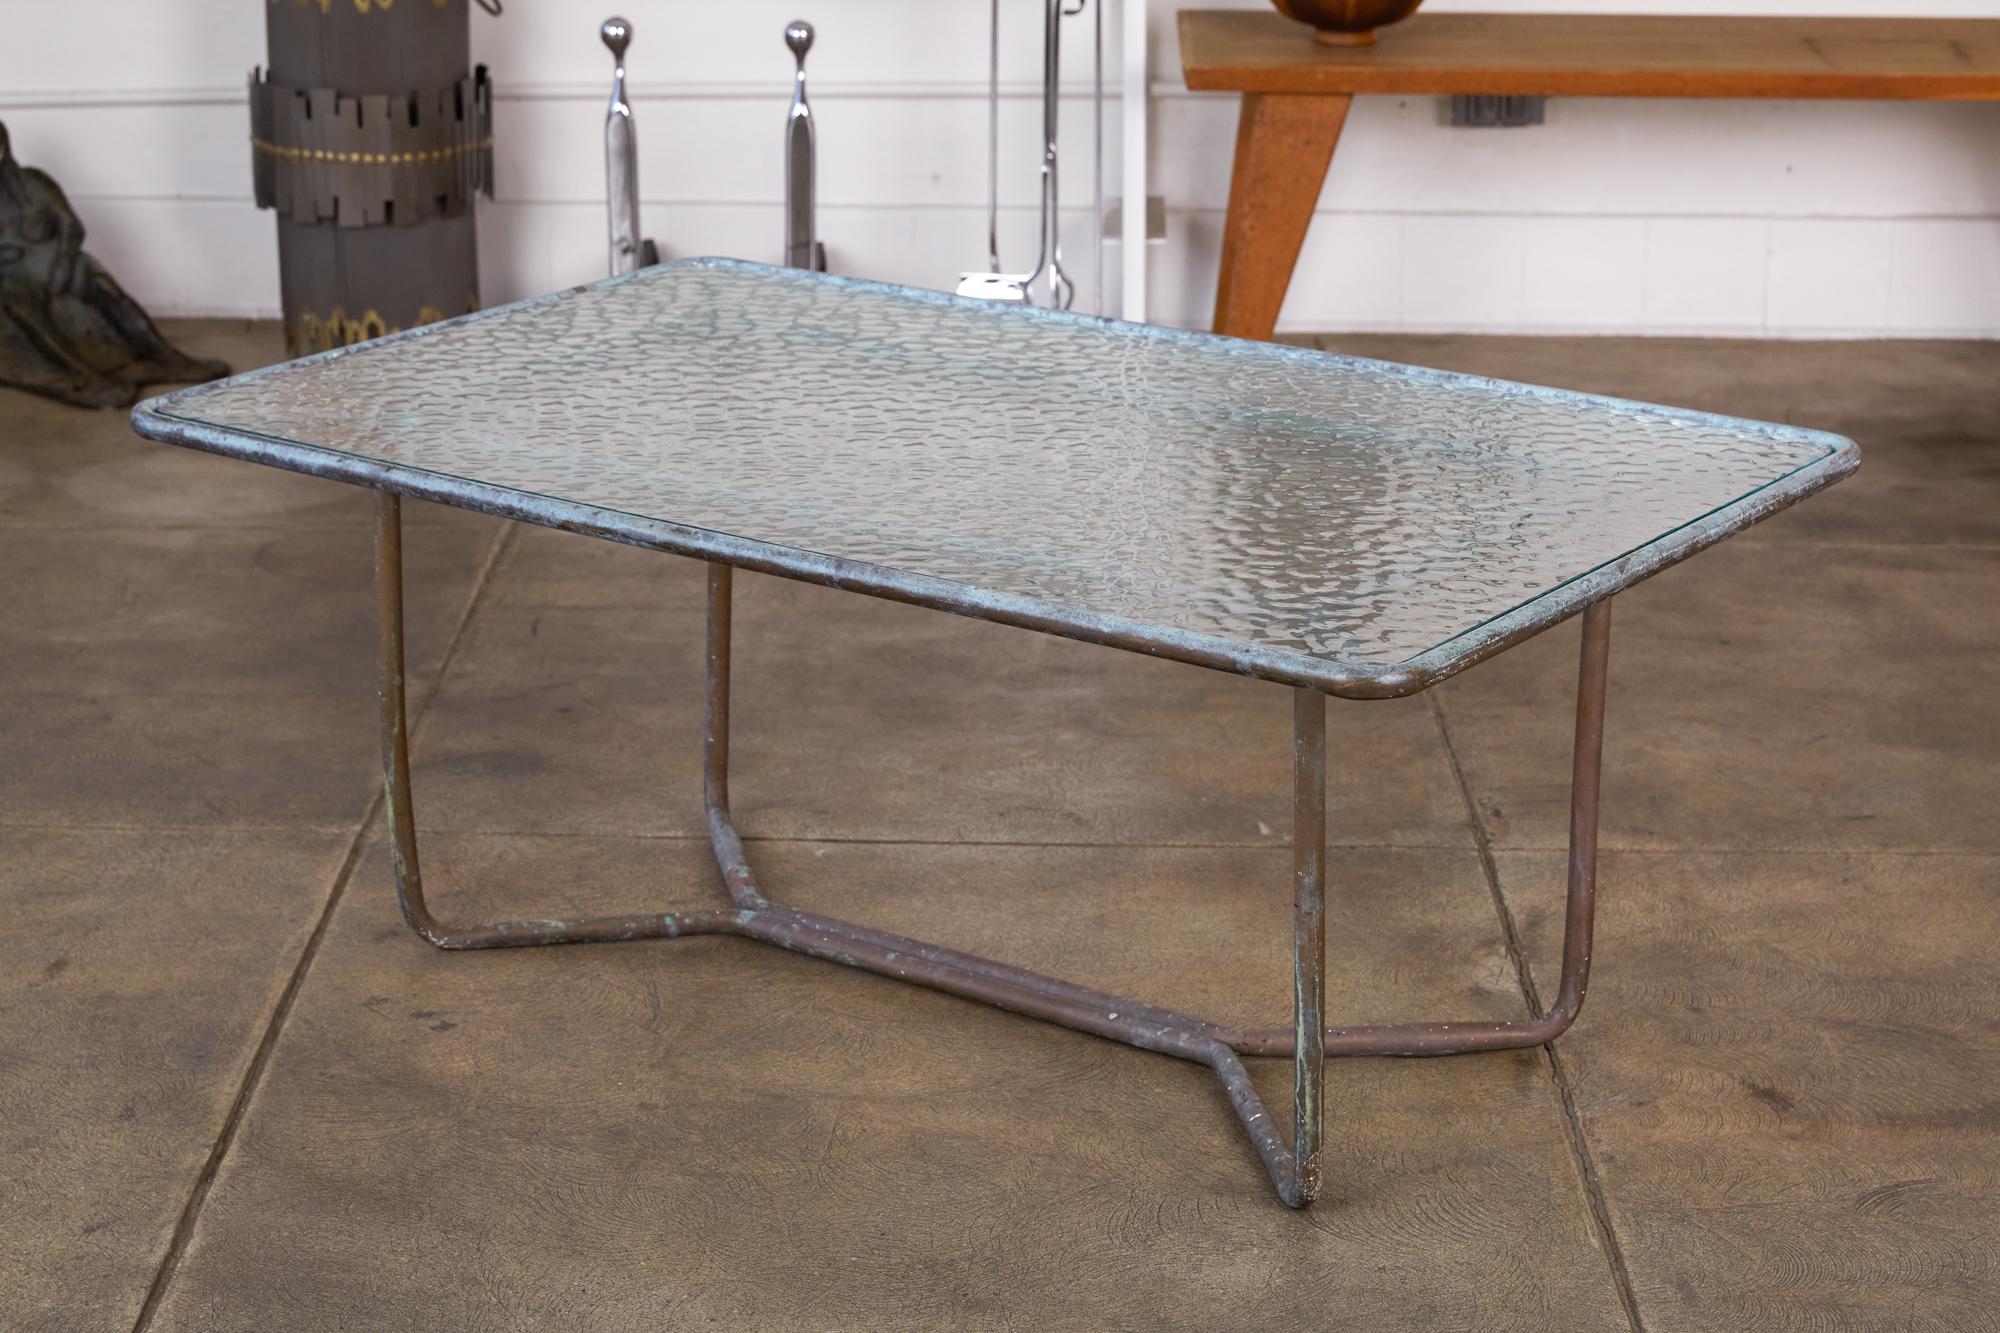 A patio coffee table in patinated bronze designed by Walter Lamb and produced by Brown Jordan. The table has a rectangular shape with rounded corners, supported by bunt tubular in matching bronze. The legs are joined by diagonal stretchers and a